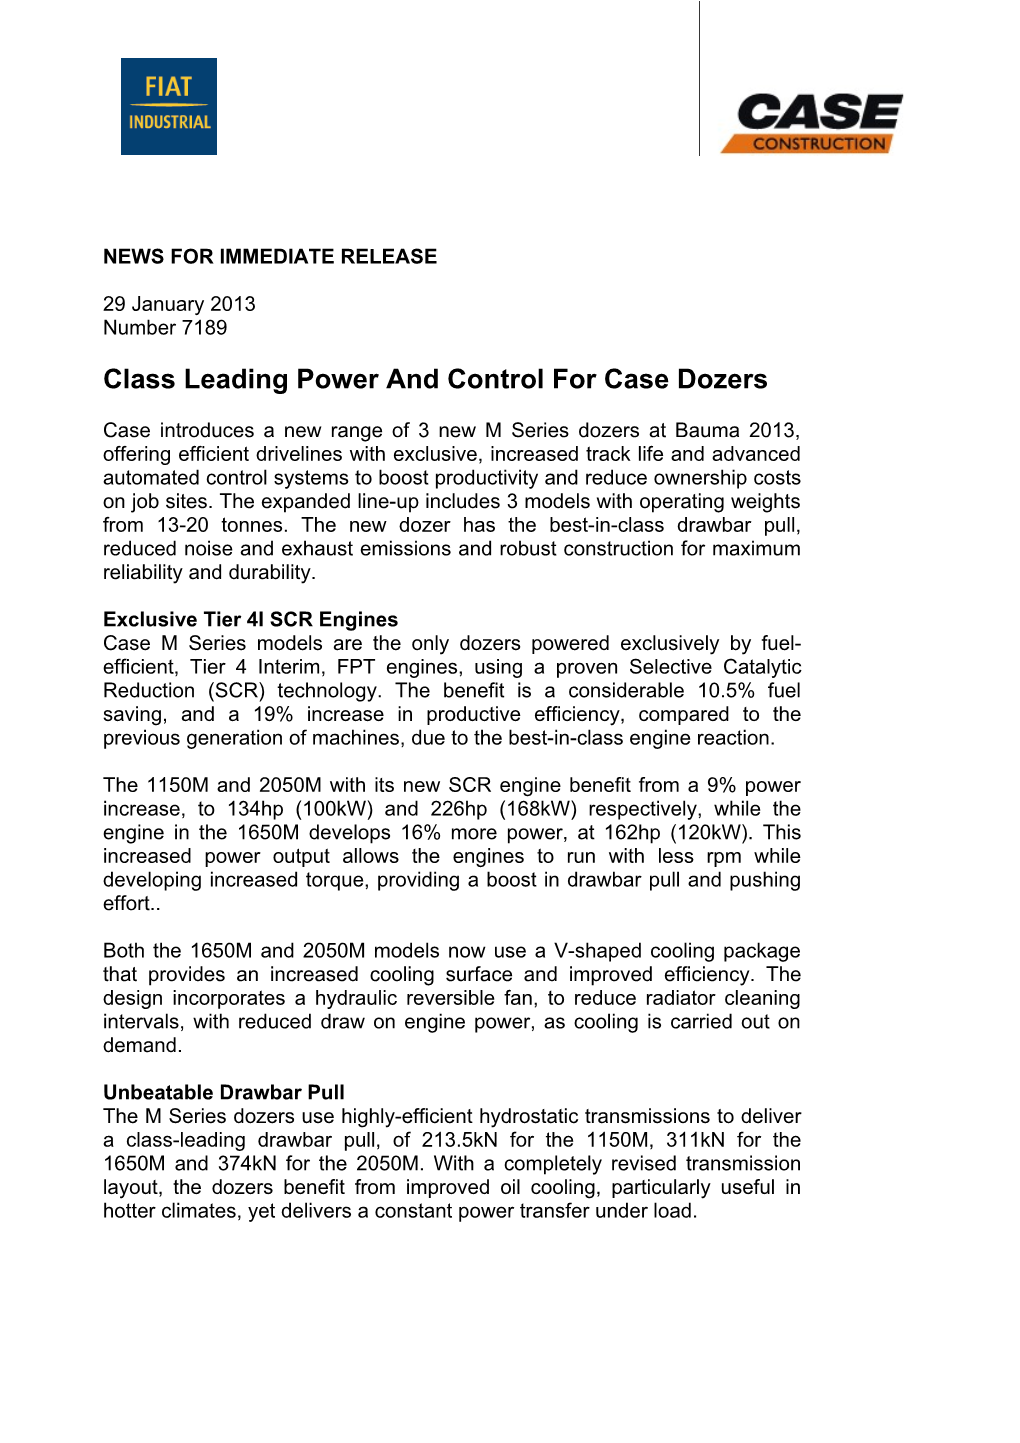 Class Leading Power and Control for Case Dozers